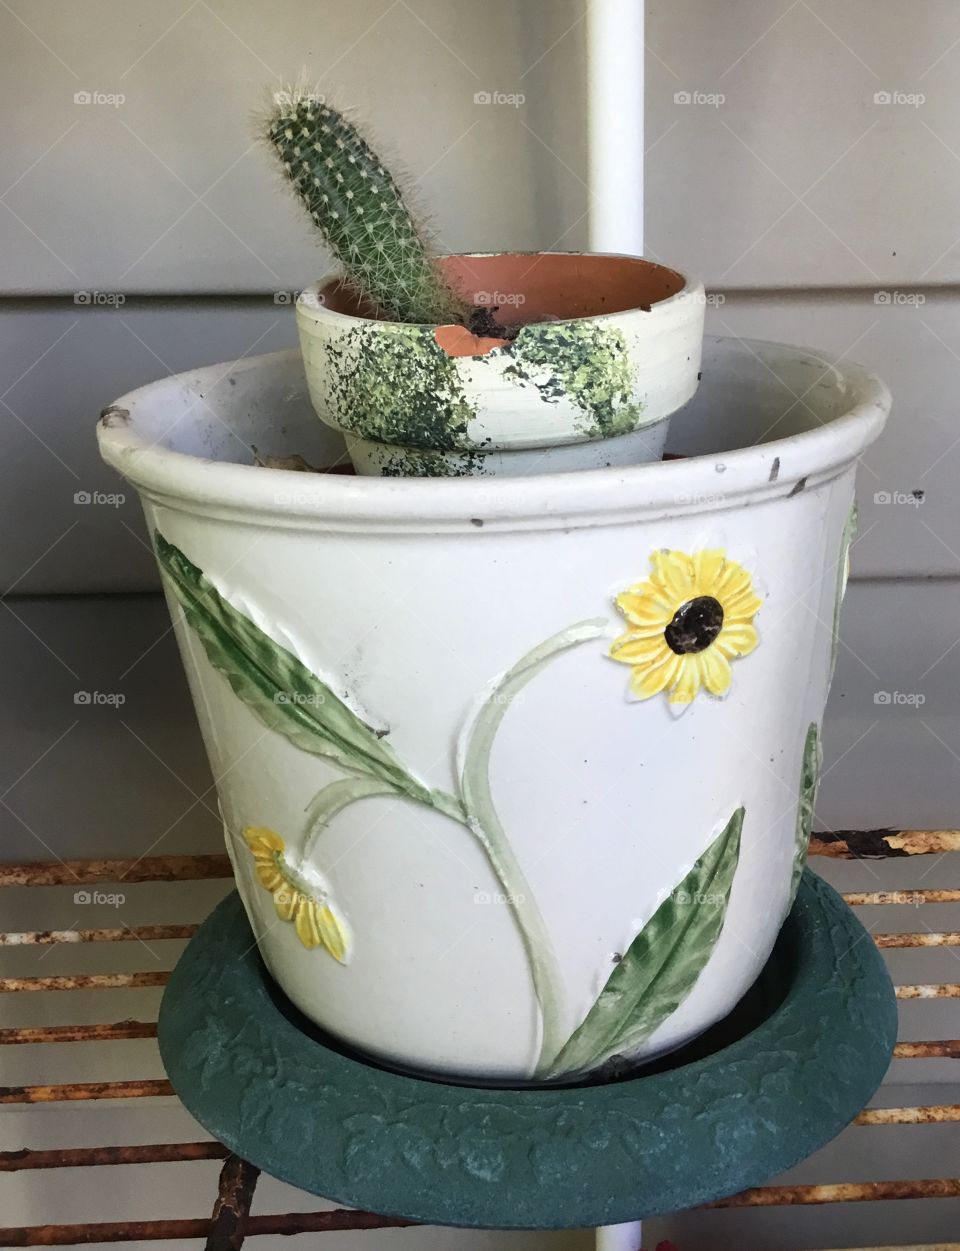 A cactus leans from its clay pot which is inside a larger colorfully decorated clay pot